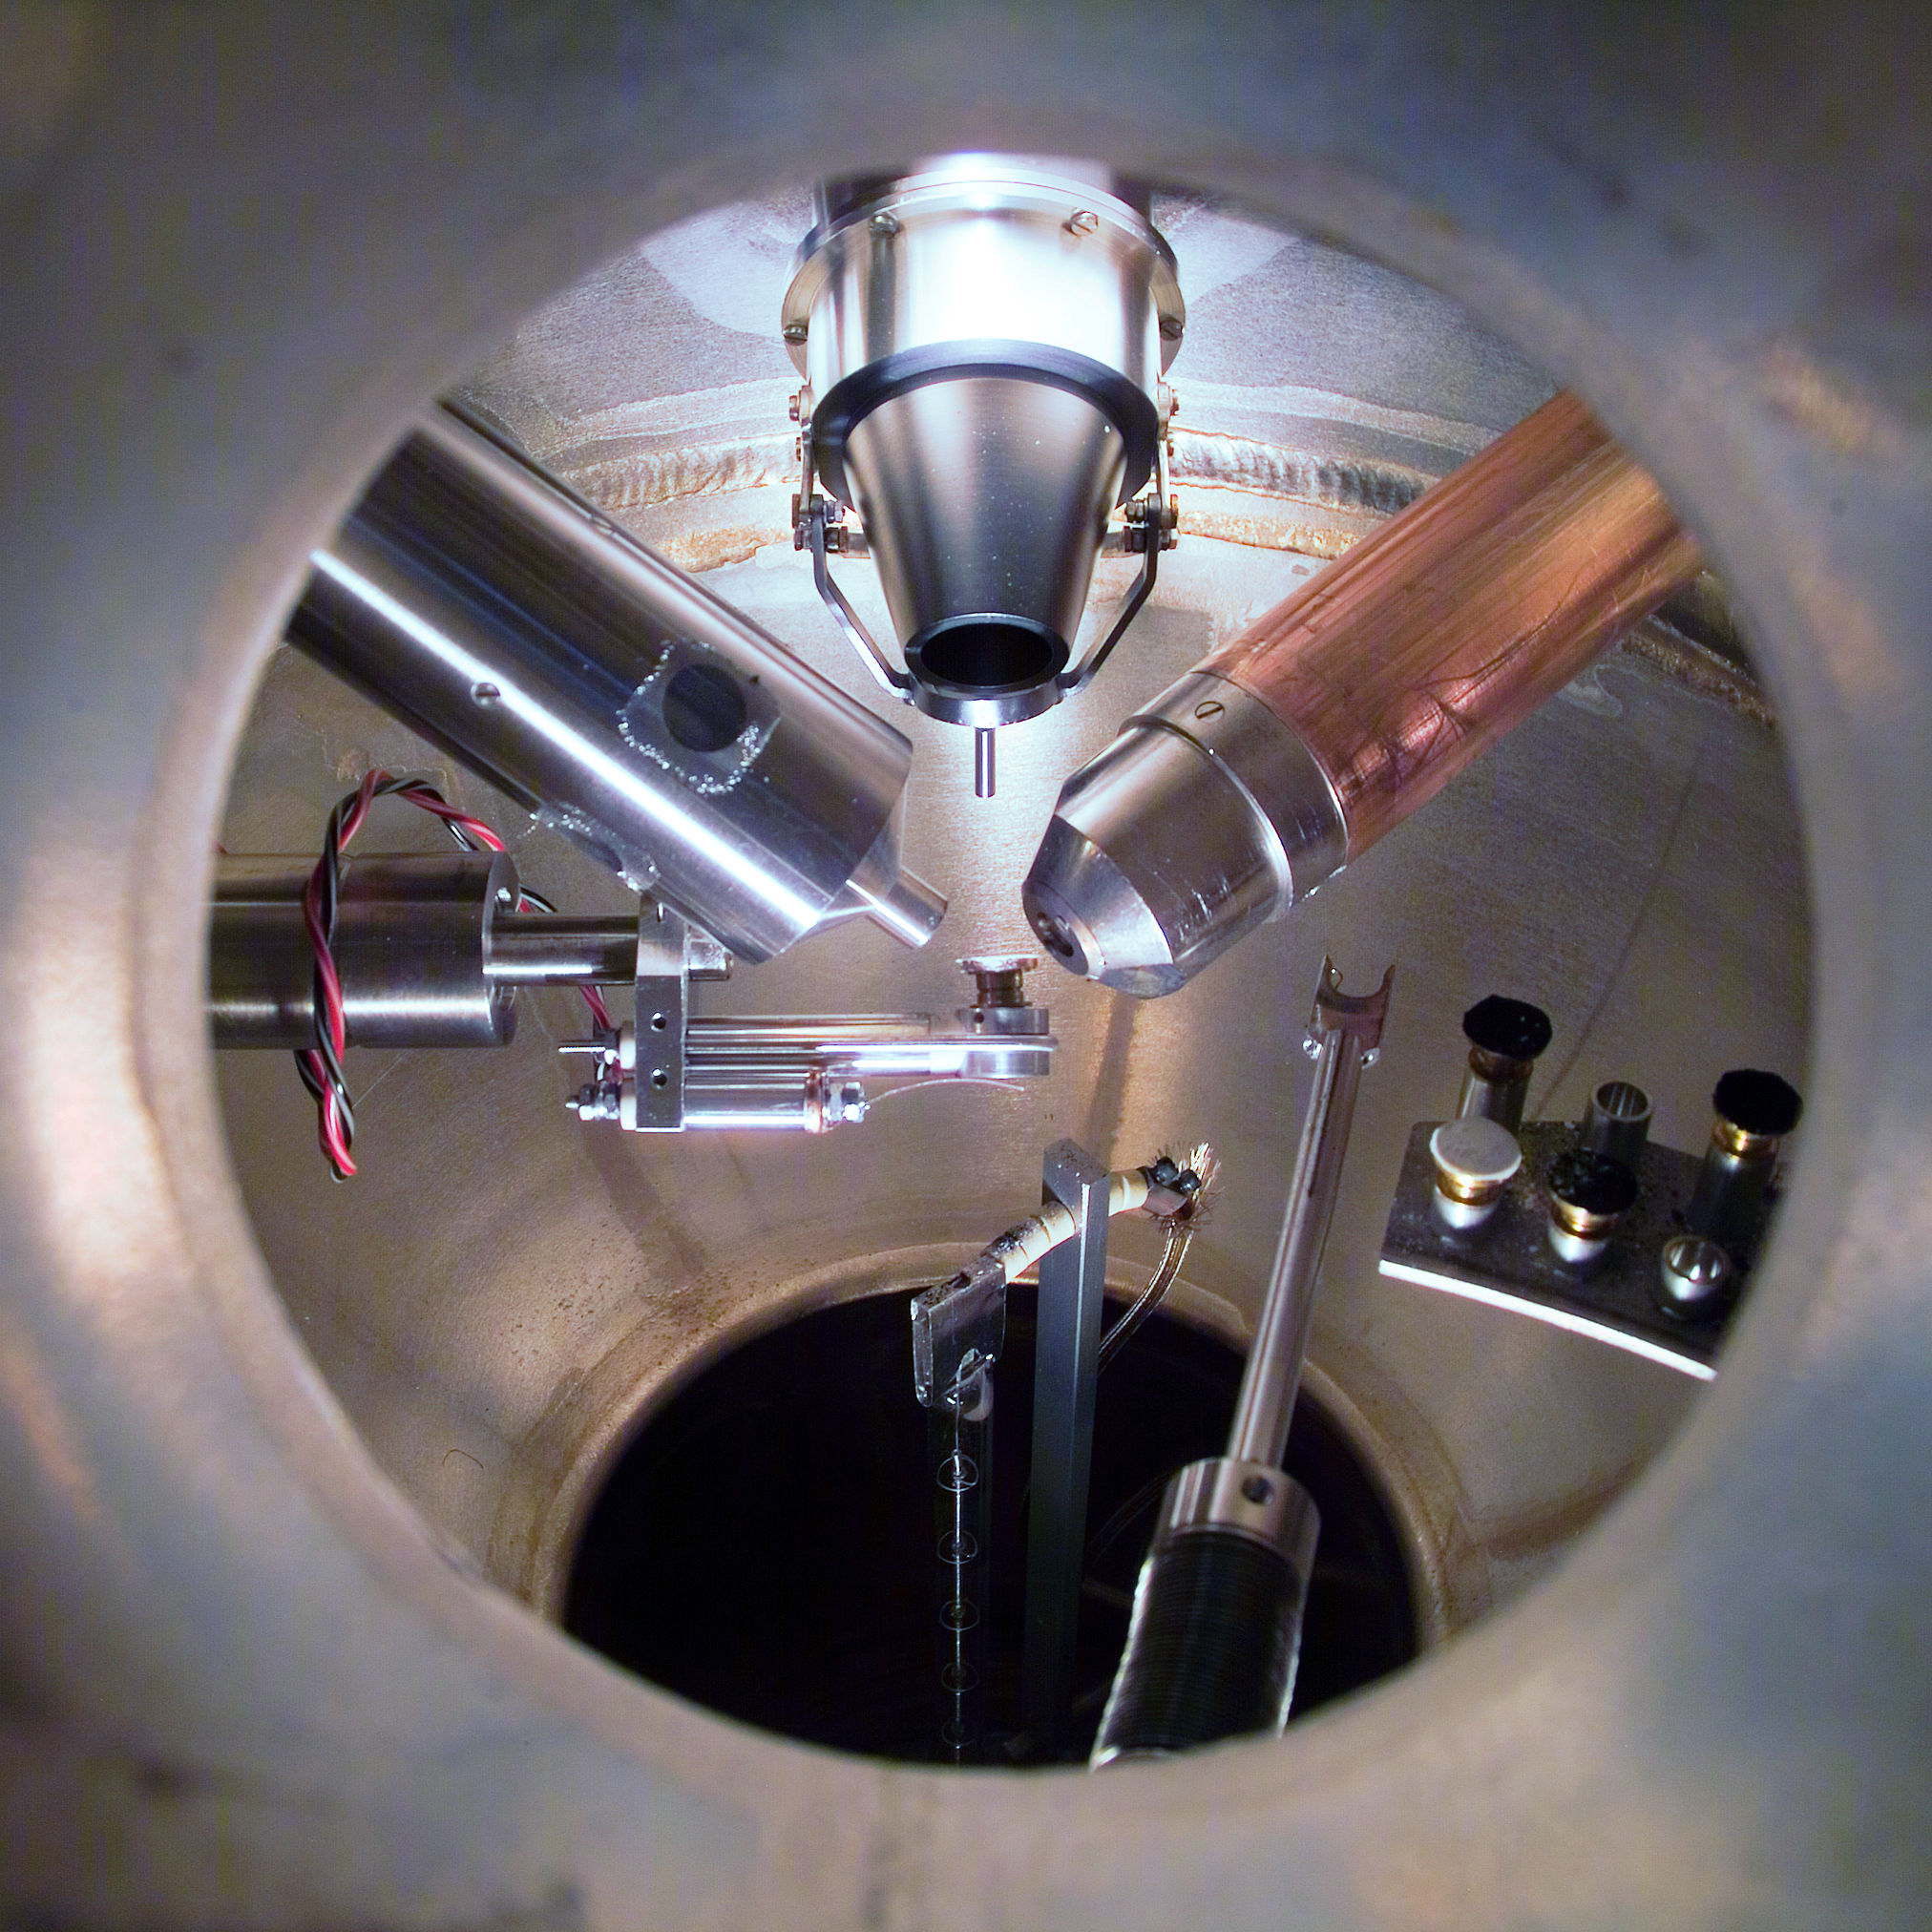 This is the inside of a surface chemical analysis system viewed through a viewport. The sample is at the focal point of many different probes, including sources of ions, electrons, and X rays. Typical techniques include Auger Electron Spectroscopy (AES) and X-ray Photoelectron Spectroscopy (XPS)